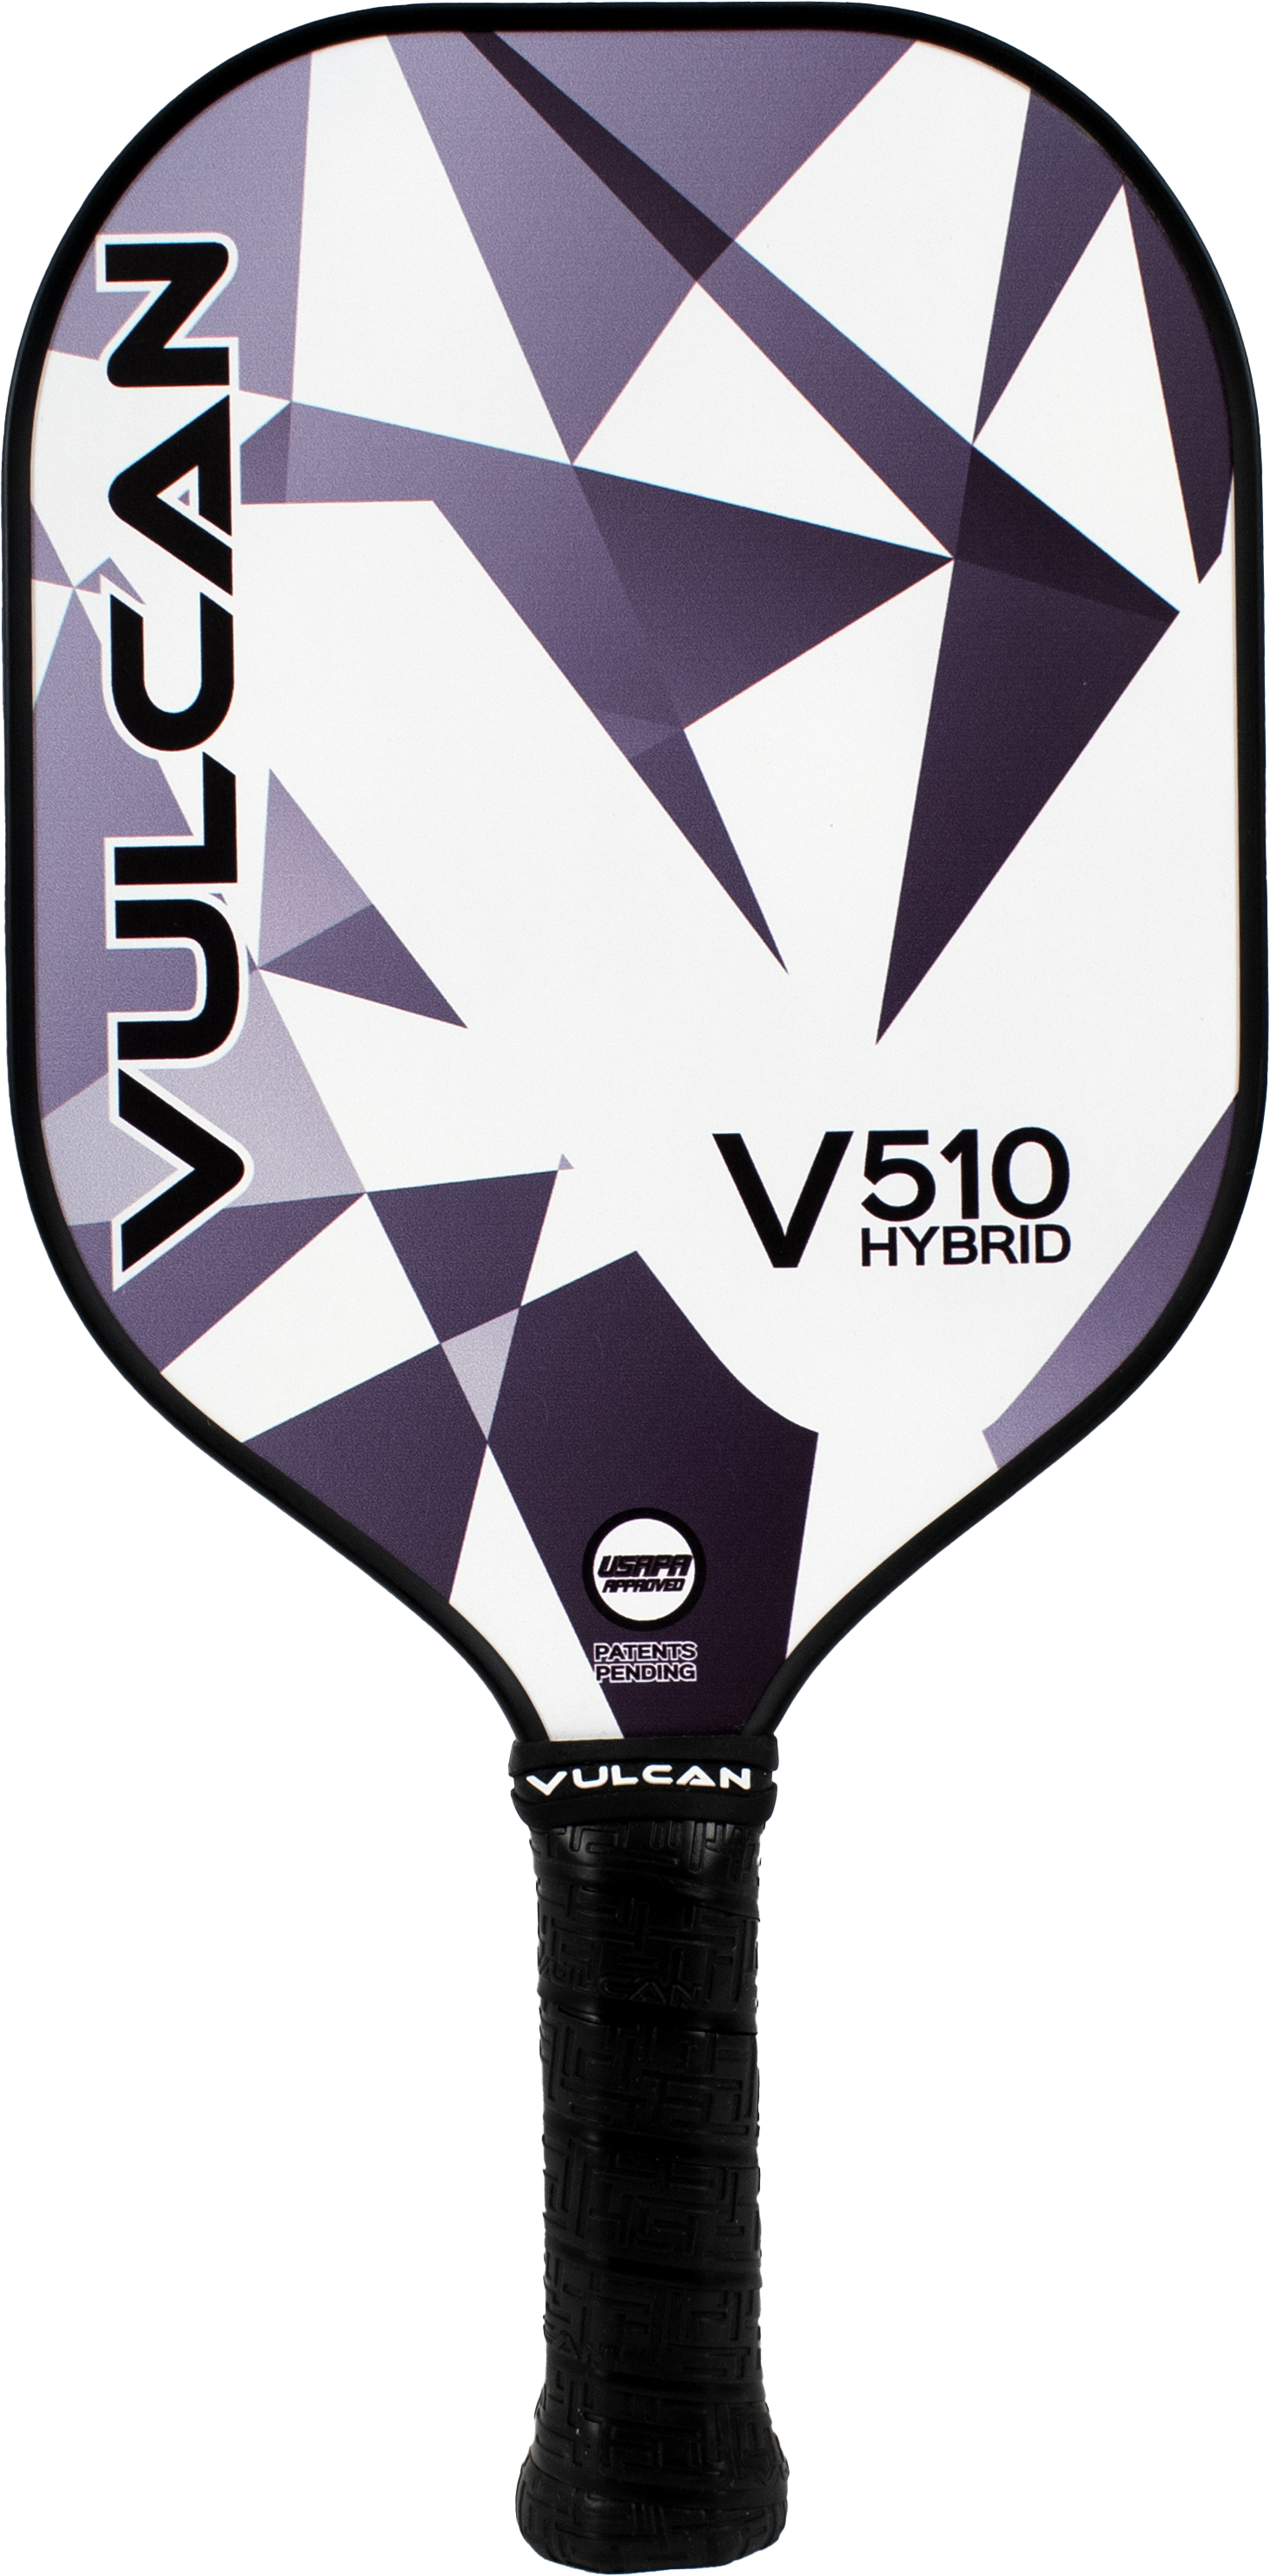 The Vulcan V510 Hybrid Pickleball Paddle by Vulcan is shown on a white background.